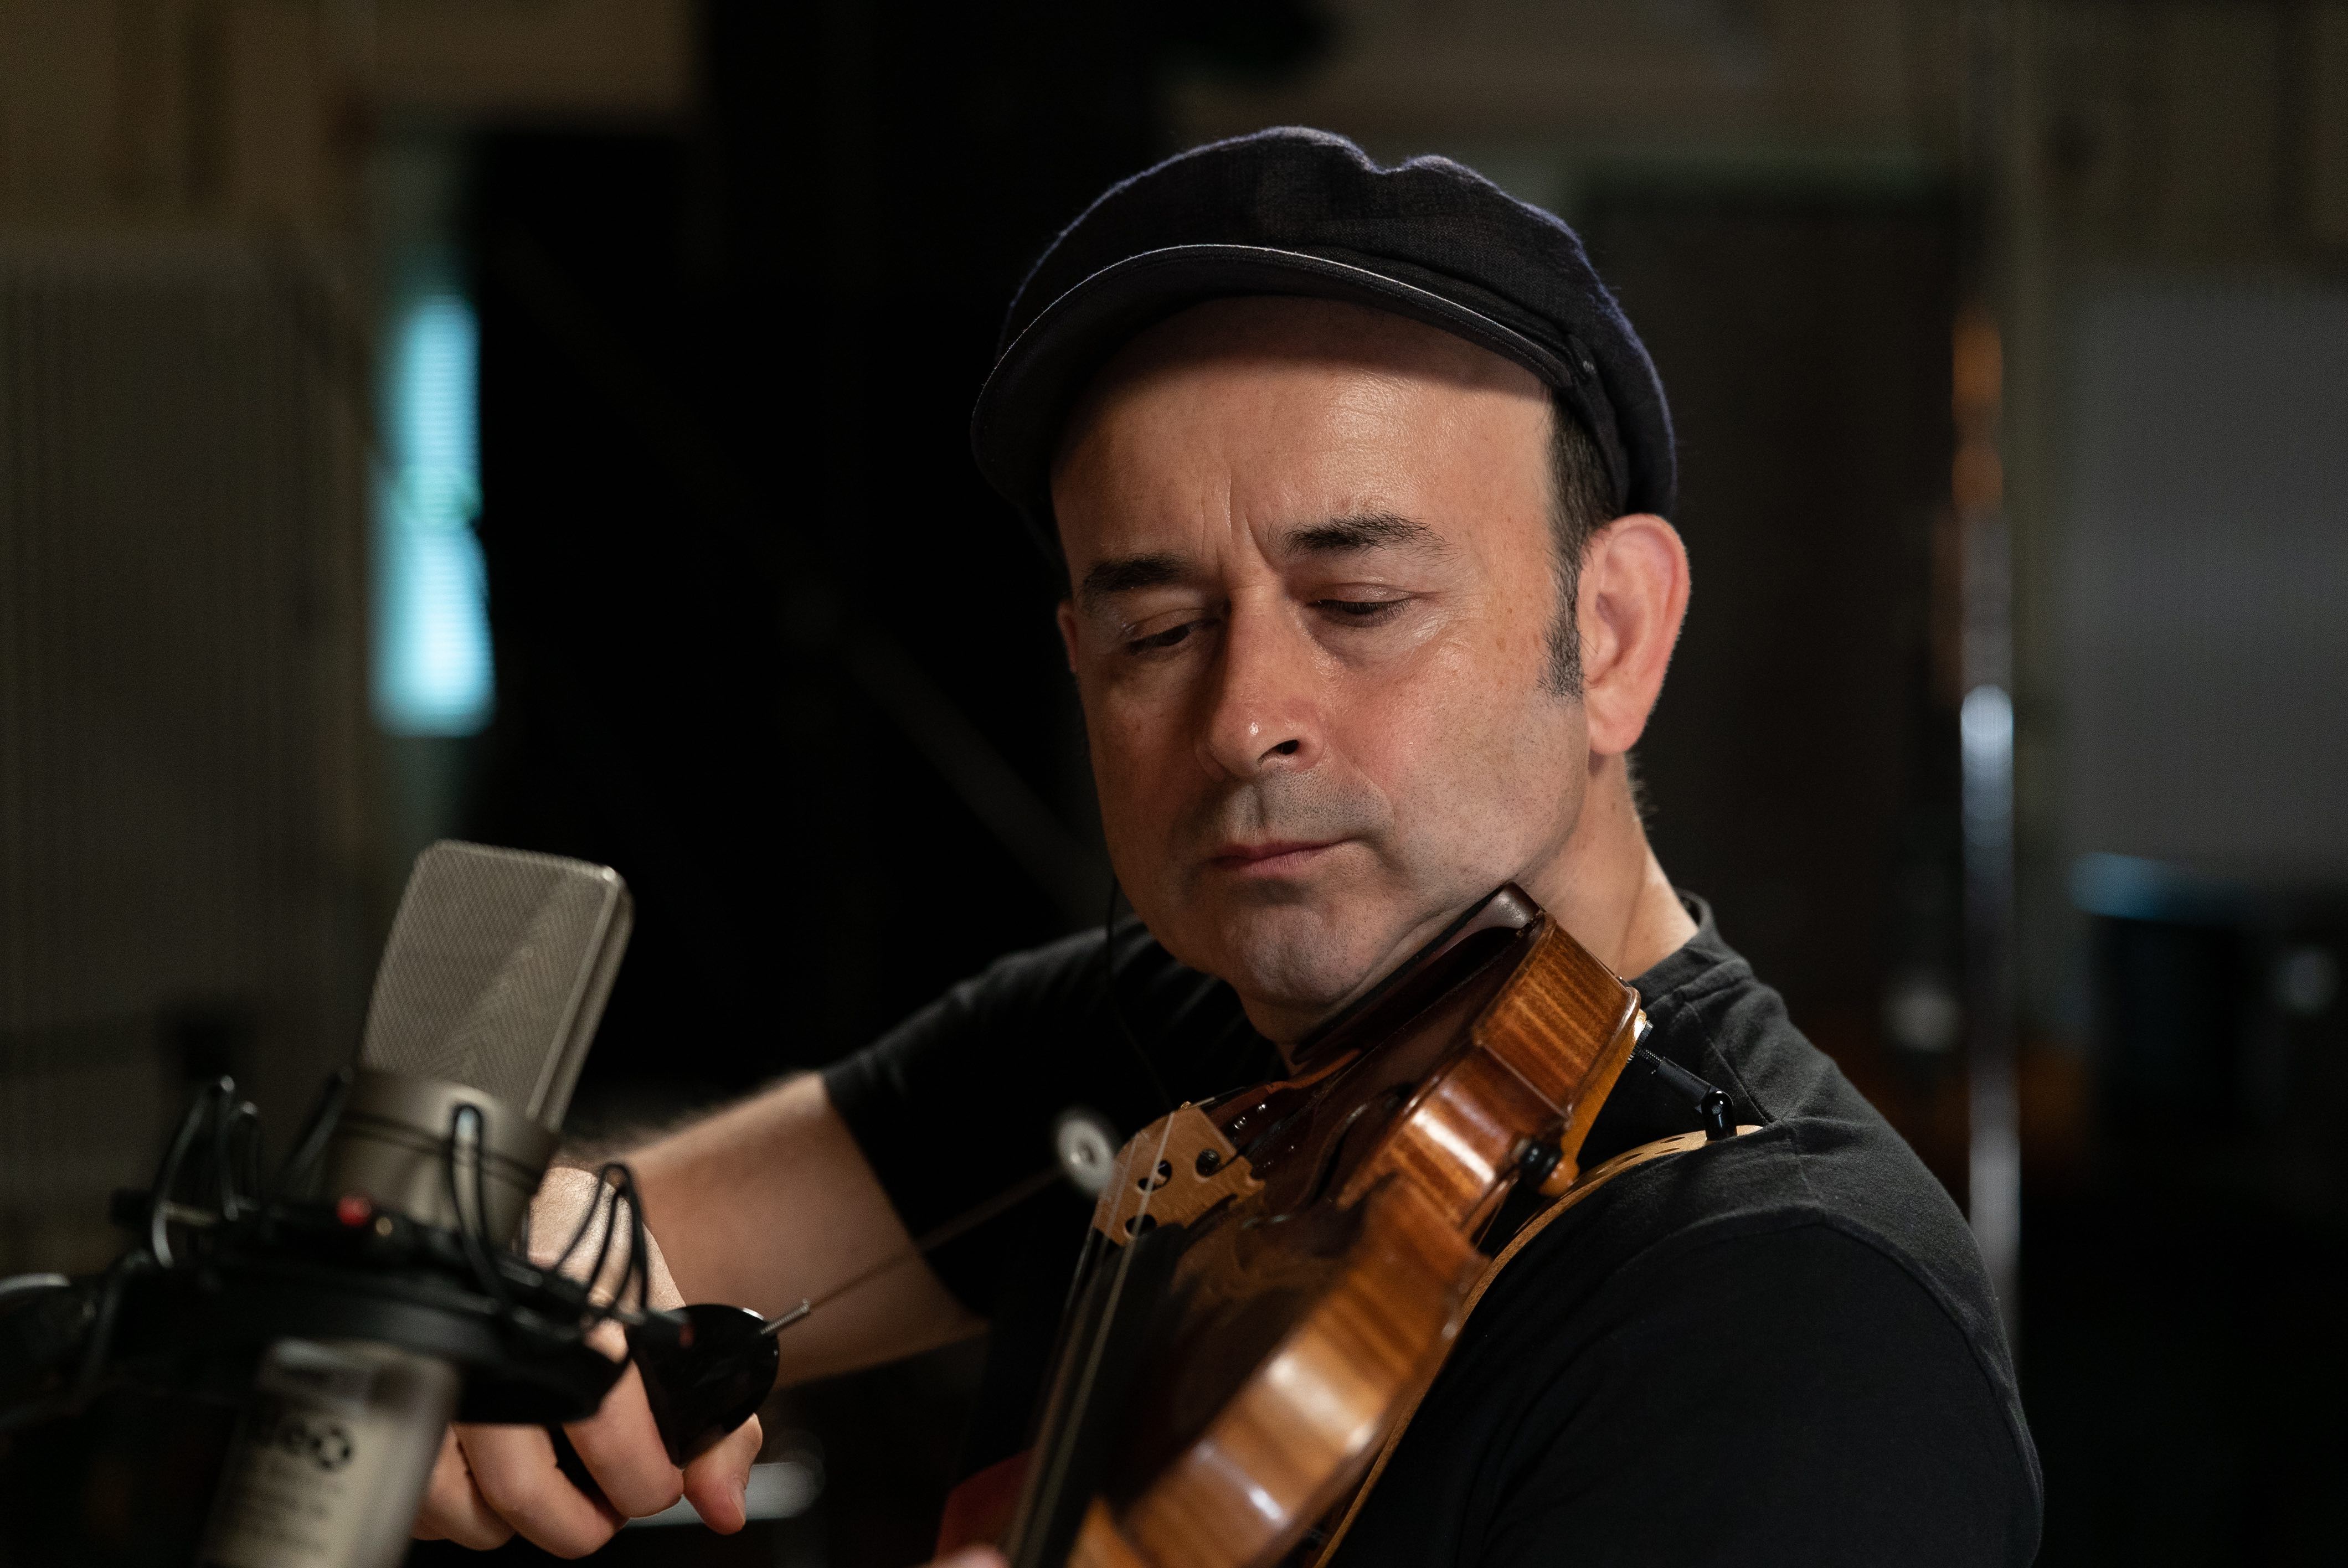 "I have always explored ways of trying to make the violin sound like other instruments. It's a fascinating experiment that I've been exploring my whole life." - Aleksey Igudesman